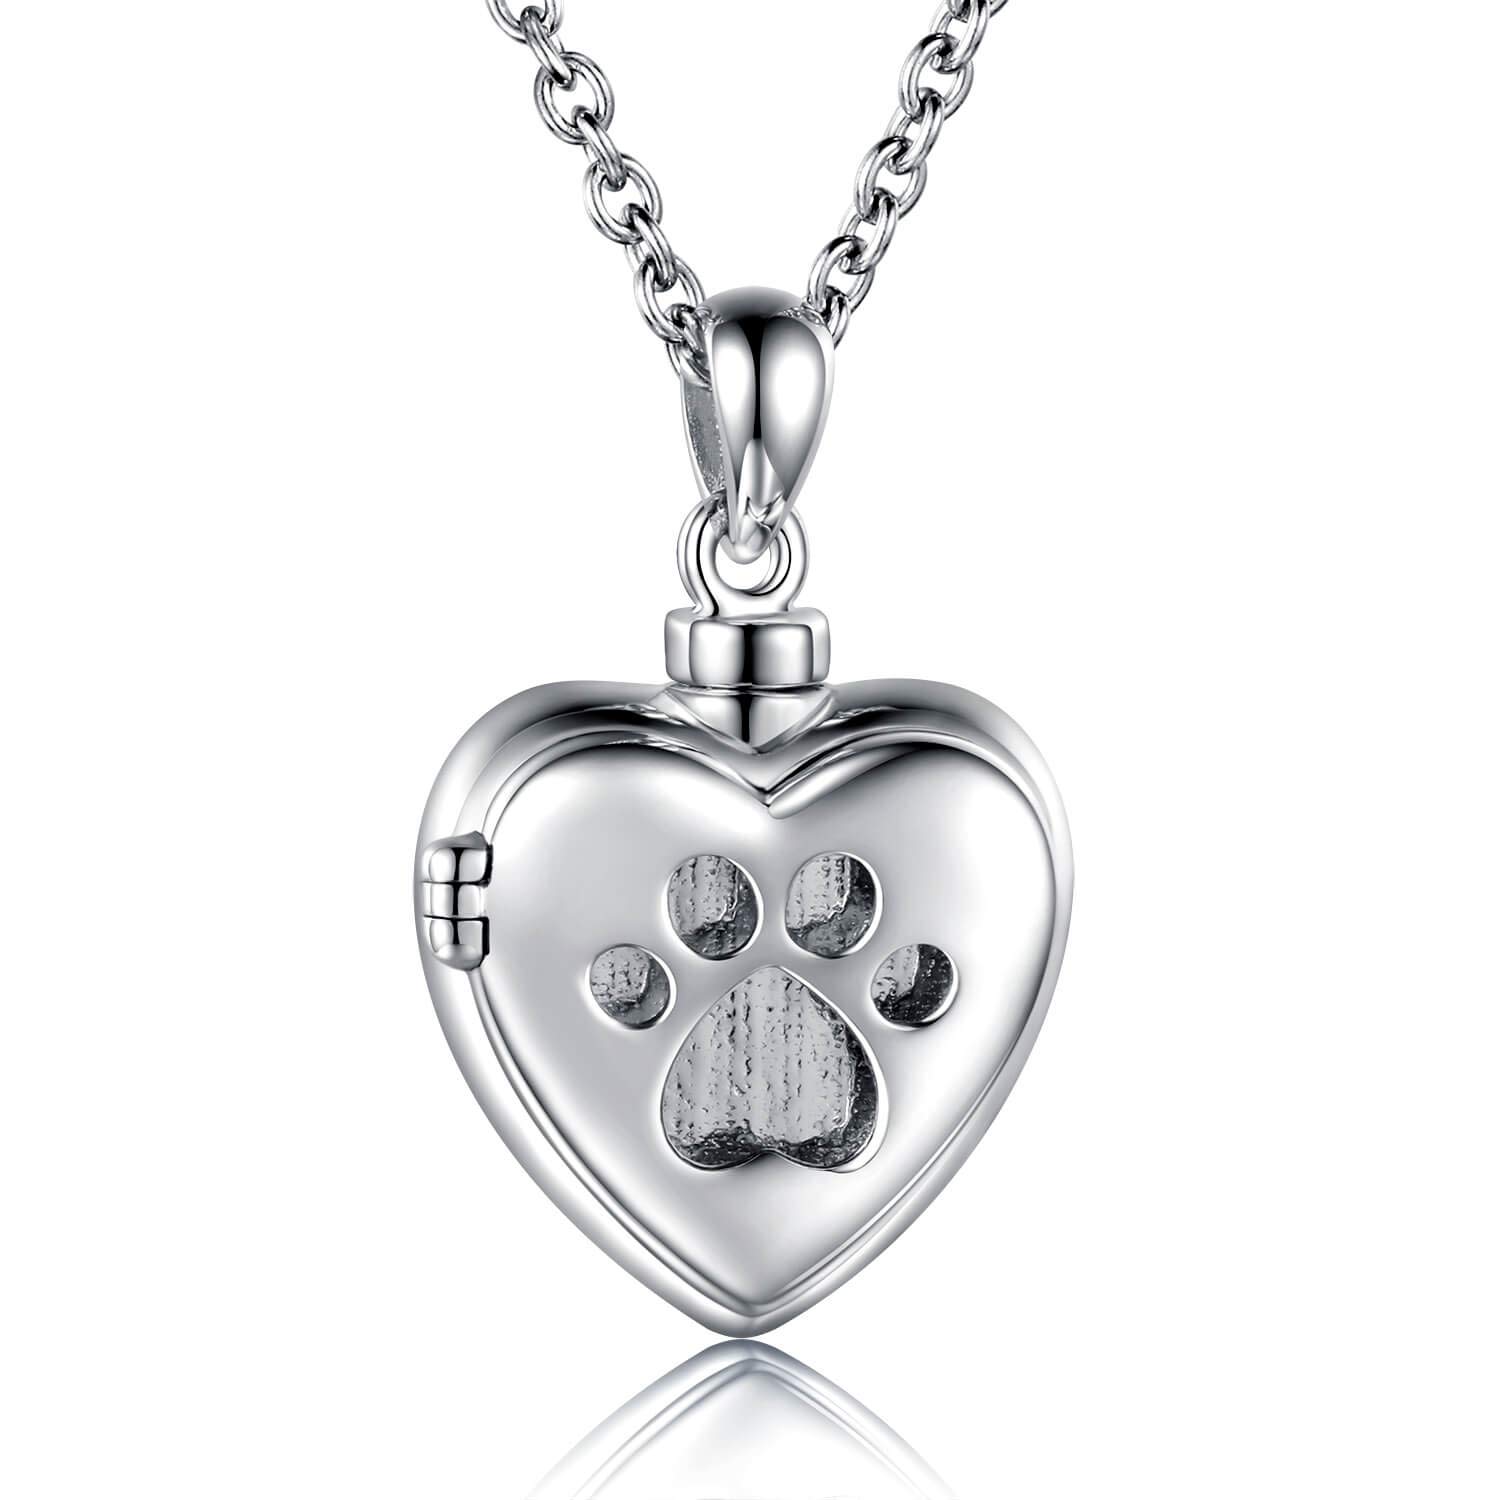 Sterling Silver Cremation Jewelry for Pet Ash